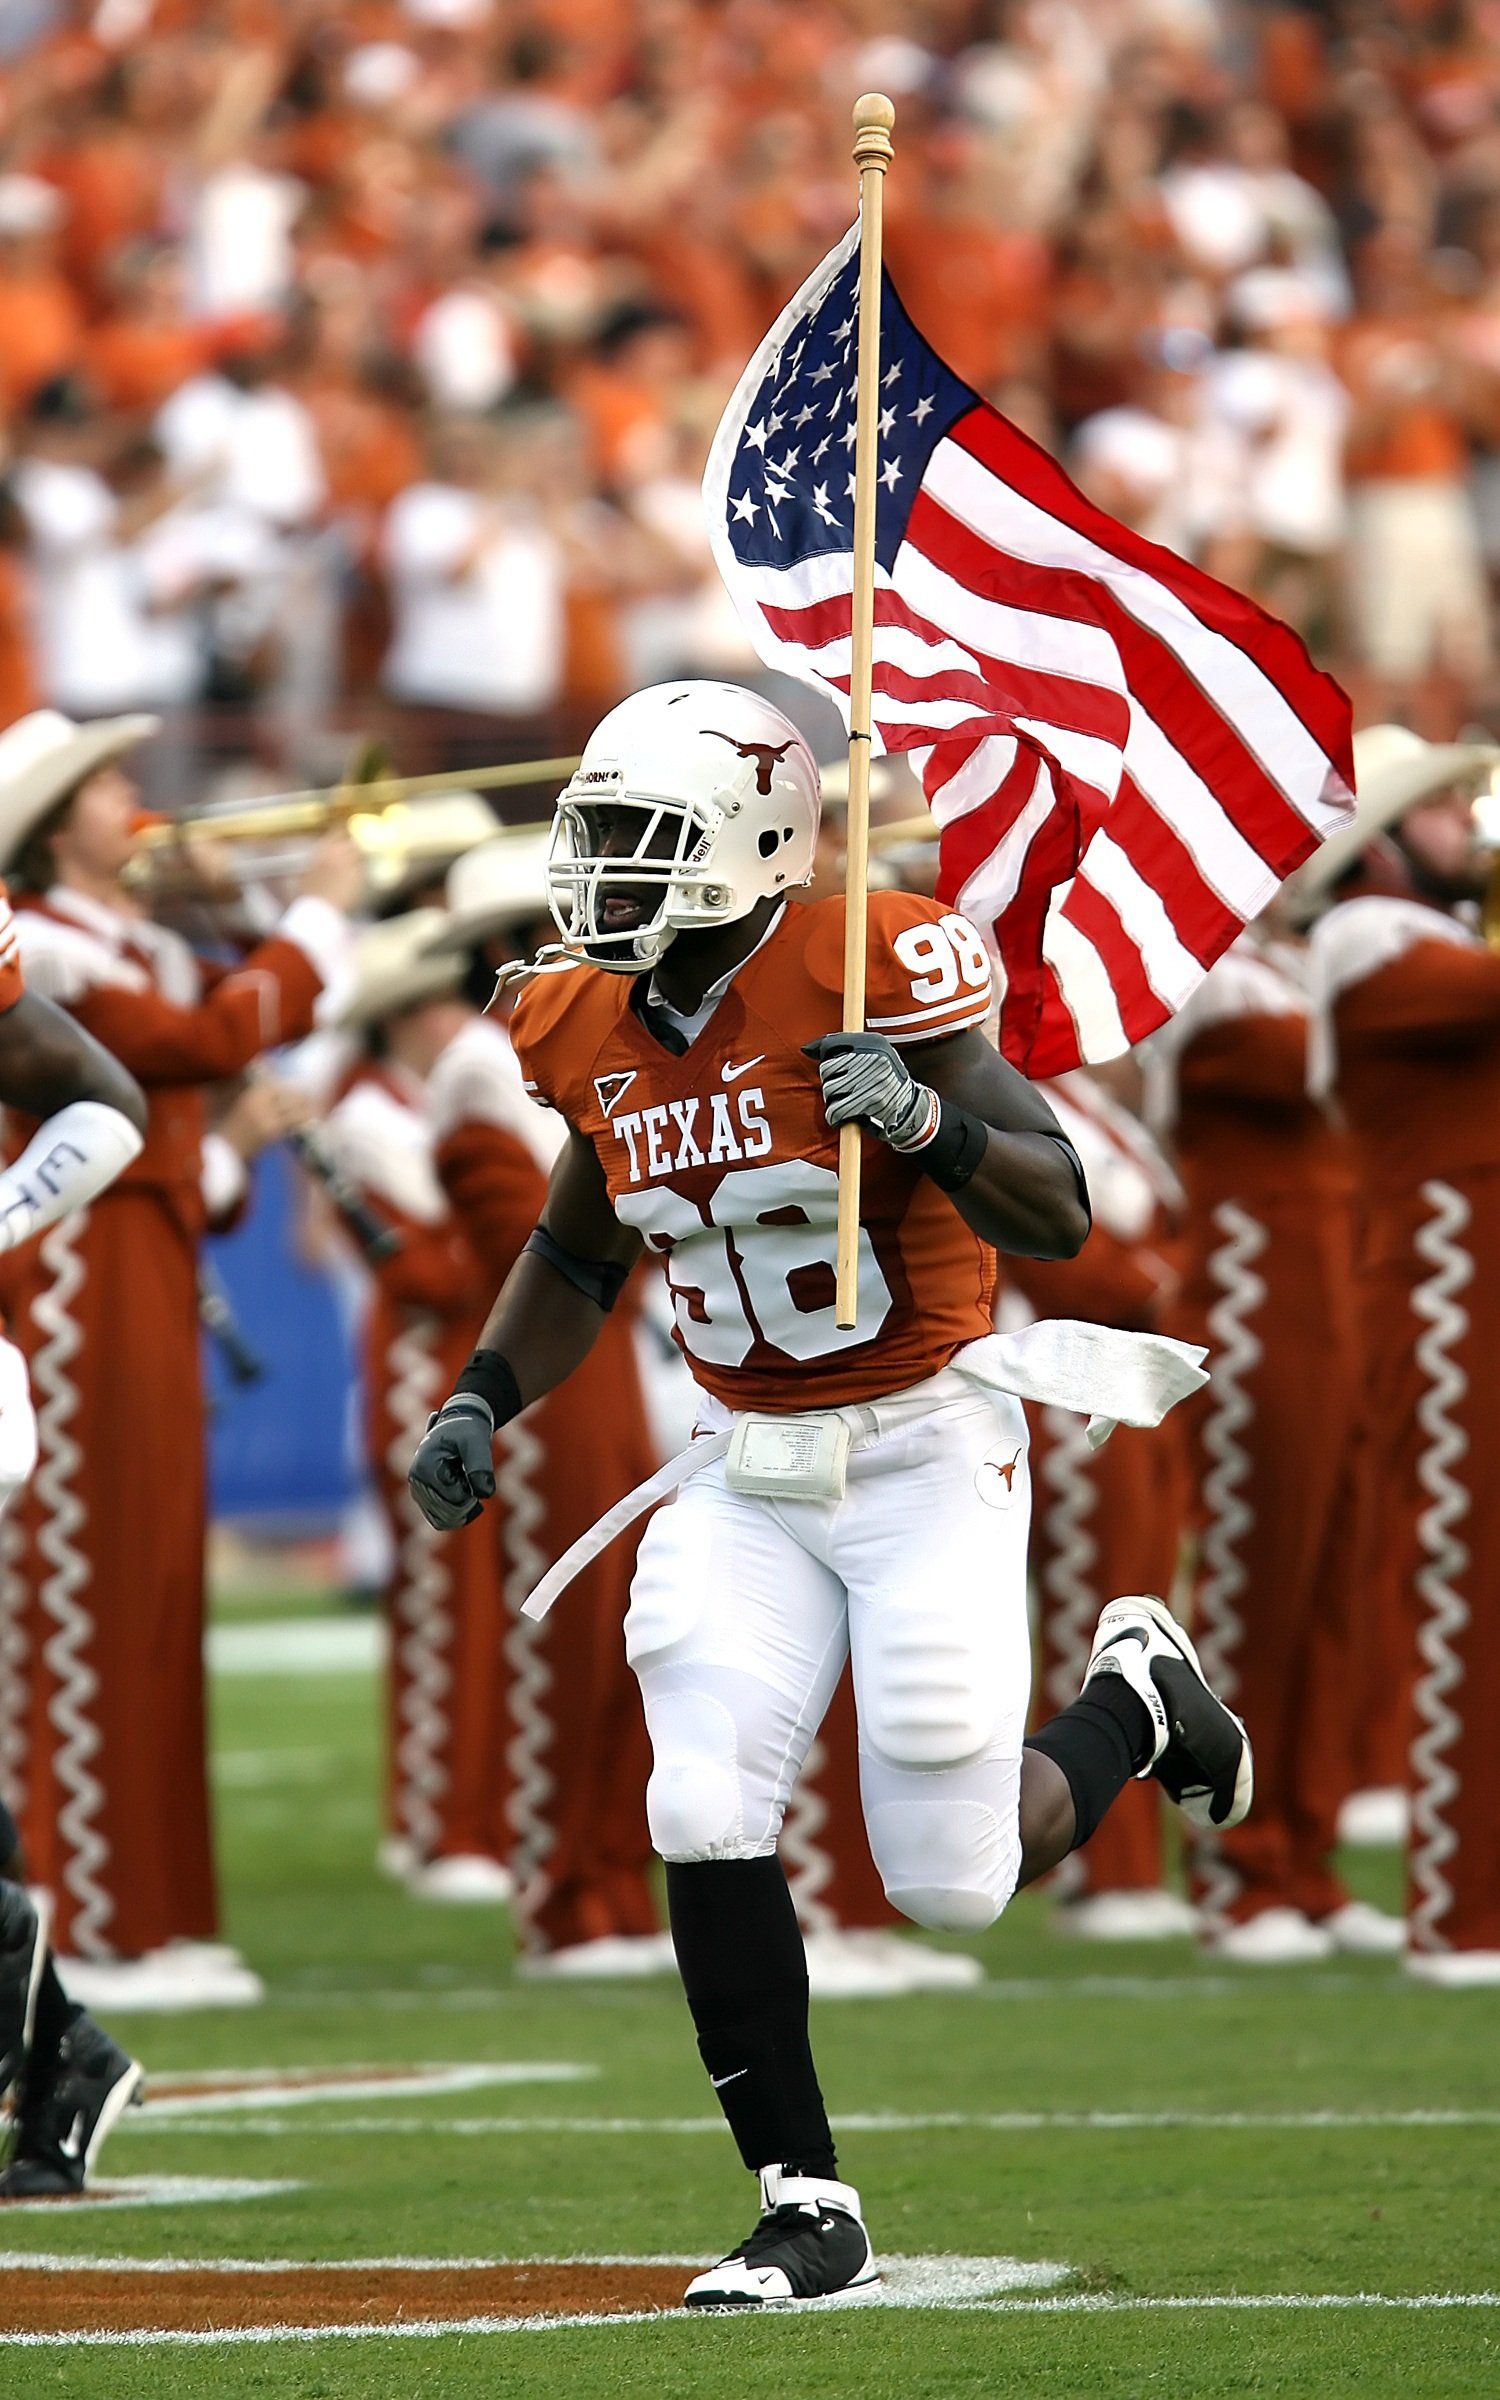 A texas football player is running with an american flag